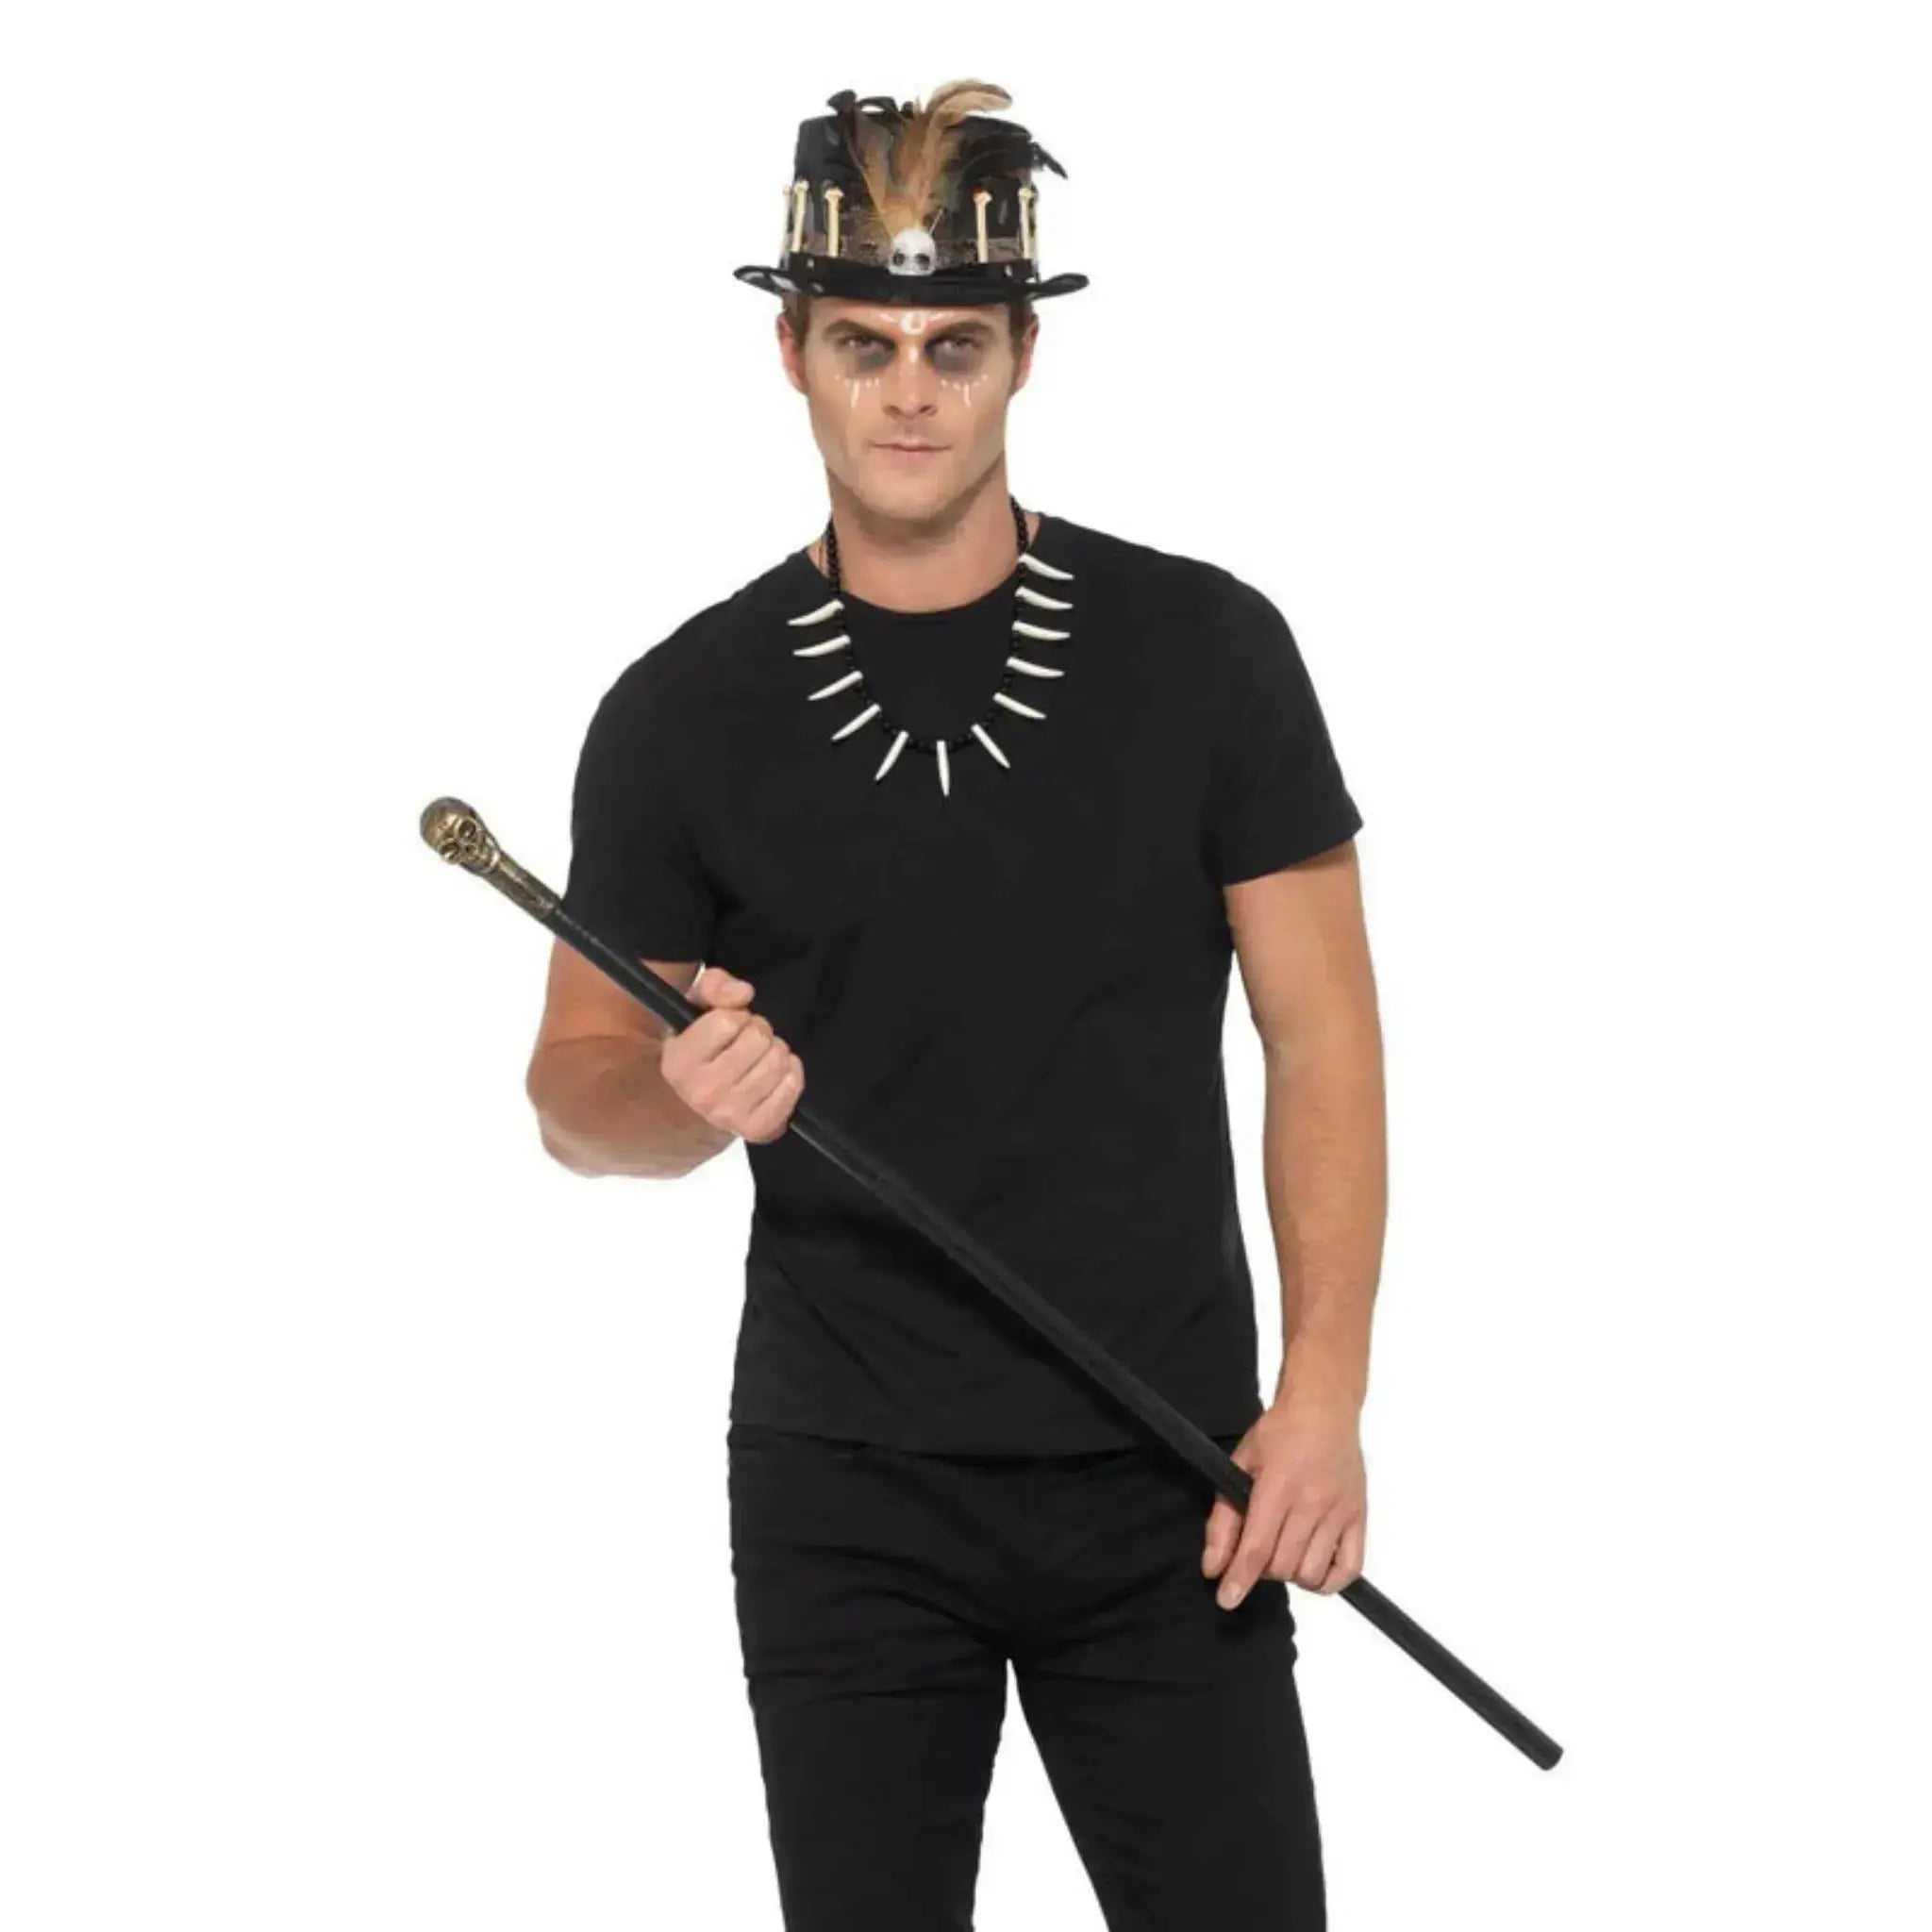 Voodoo Kit, with Feather Top Hat | The Party Hut